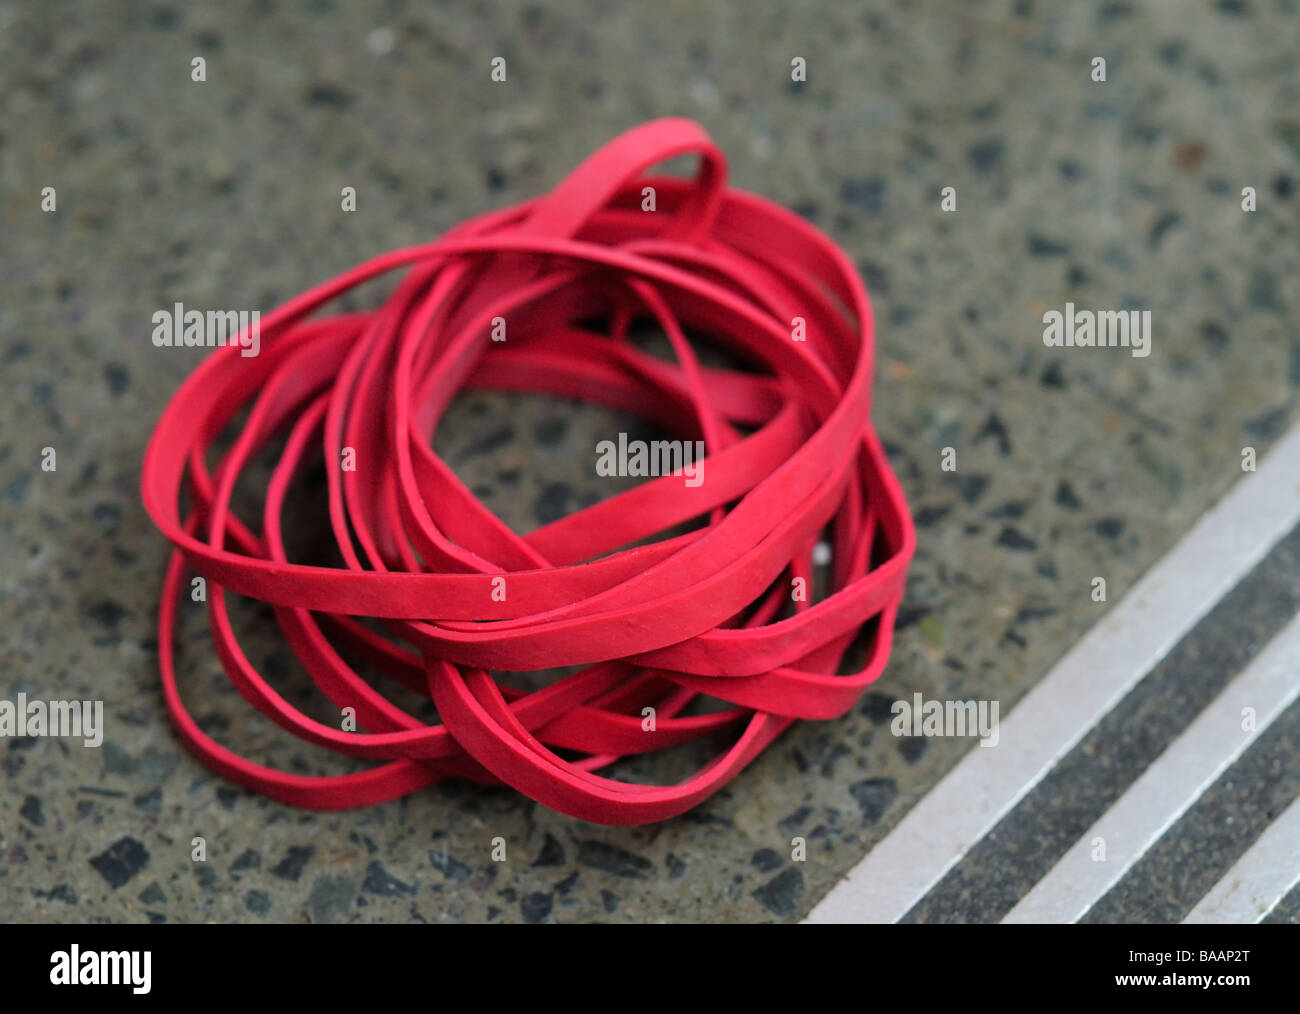 Discarded Red Post Office Elastic Bands Stock Photo - Alamy